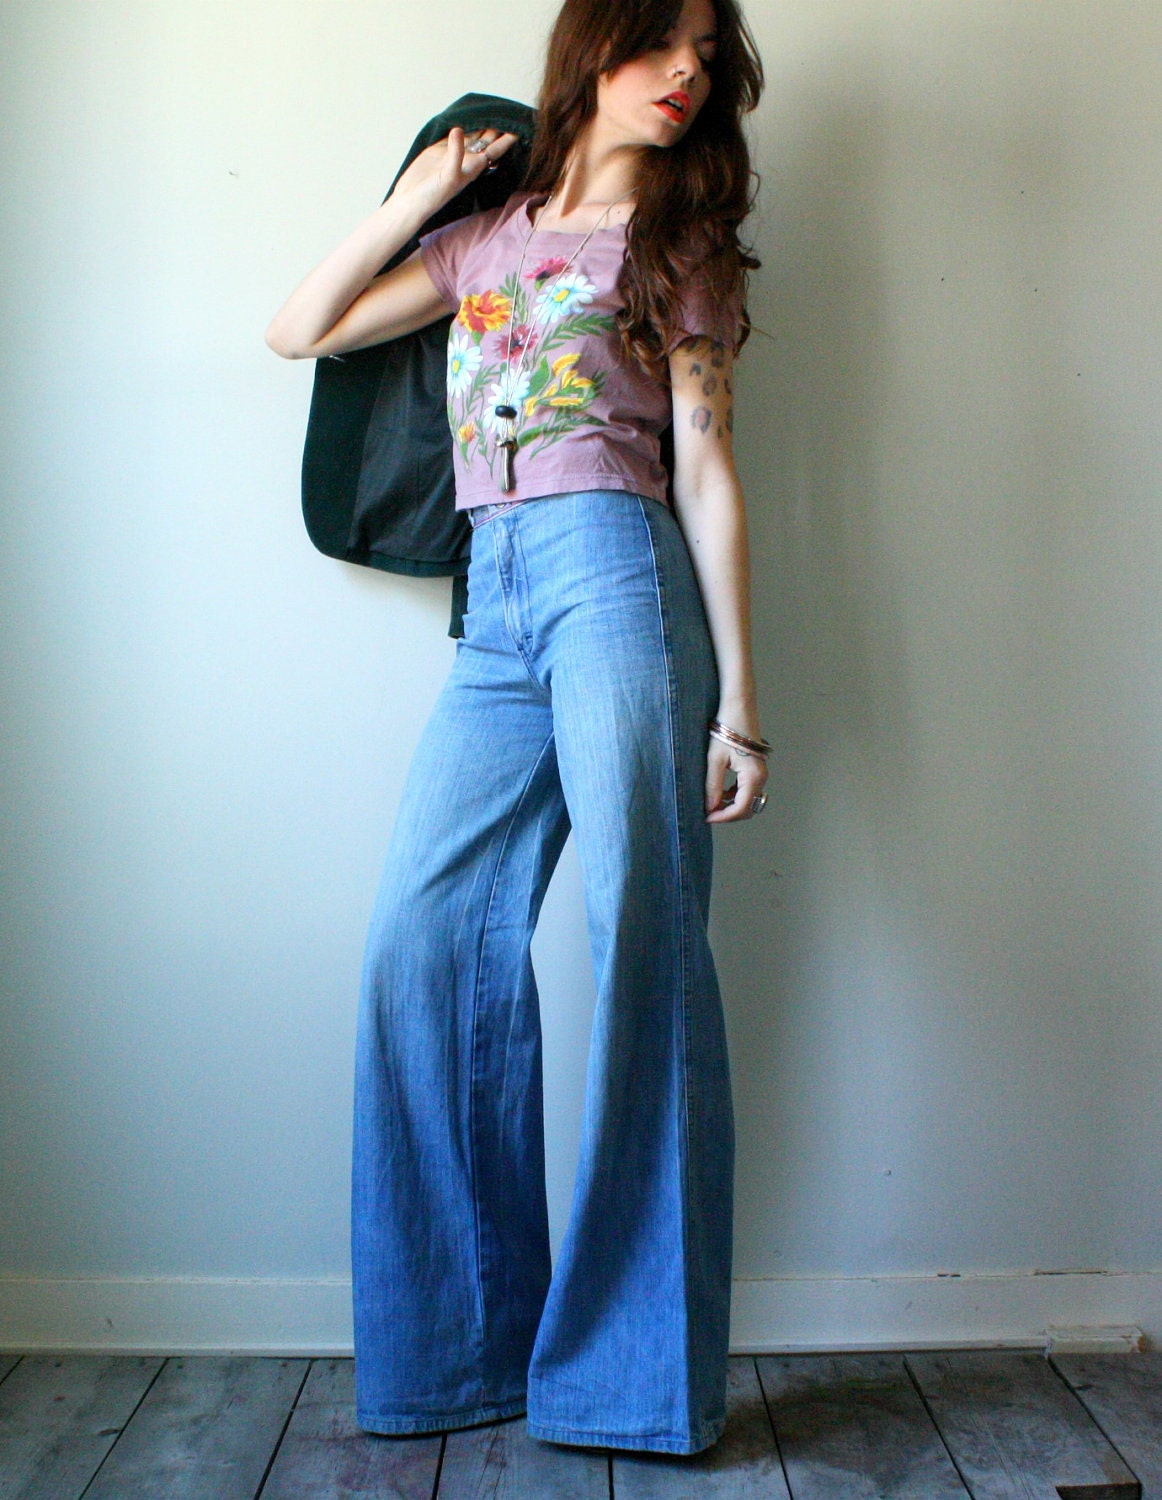 vintage 70s bell bottoms. high waist and large flair bottoms.